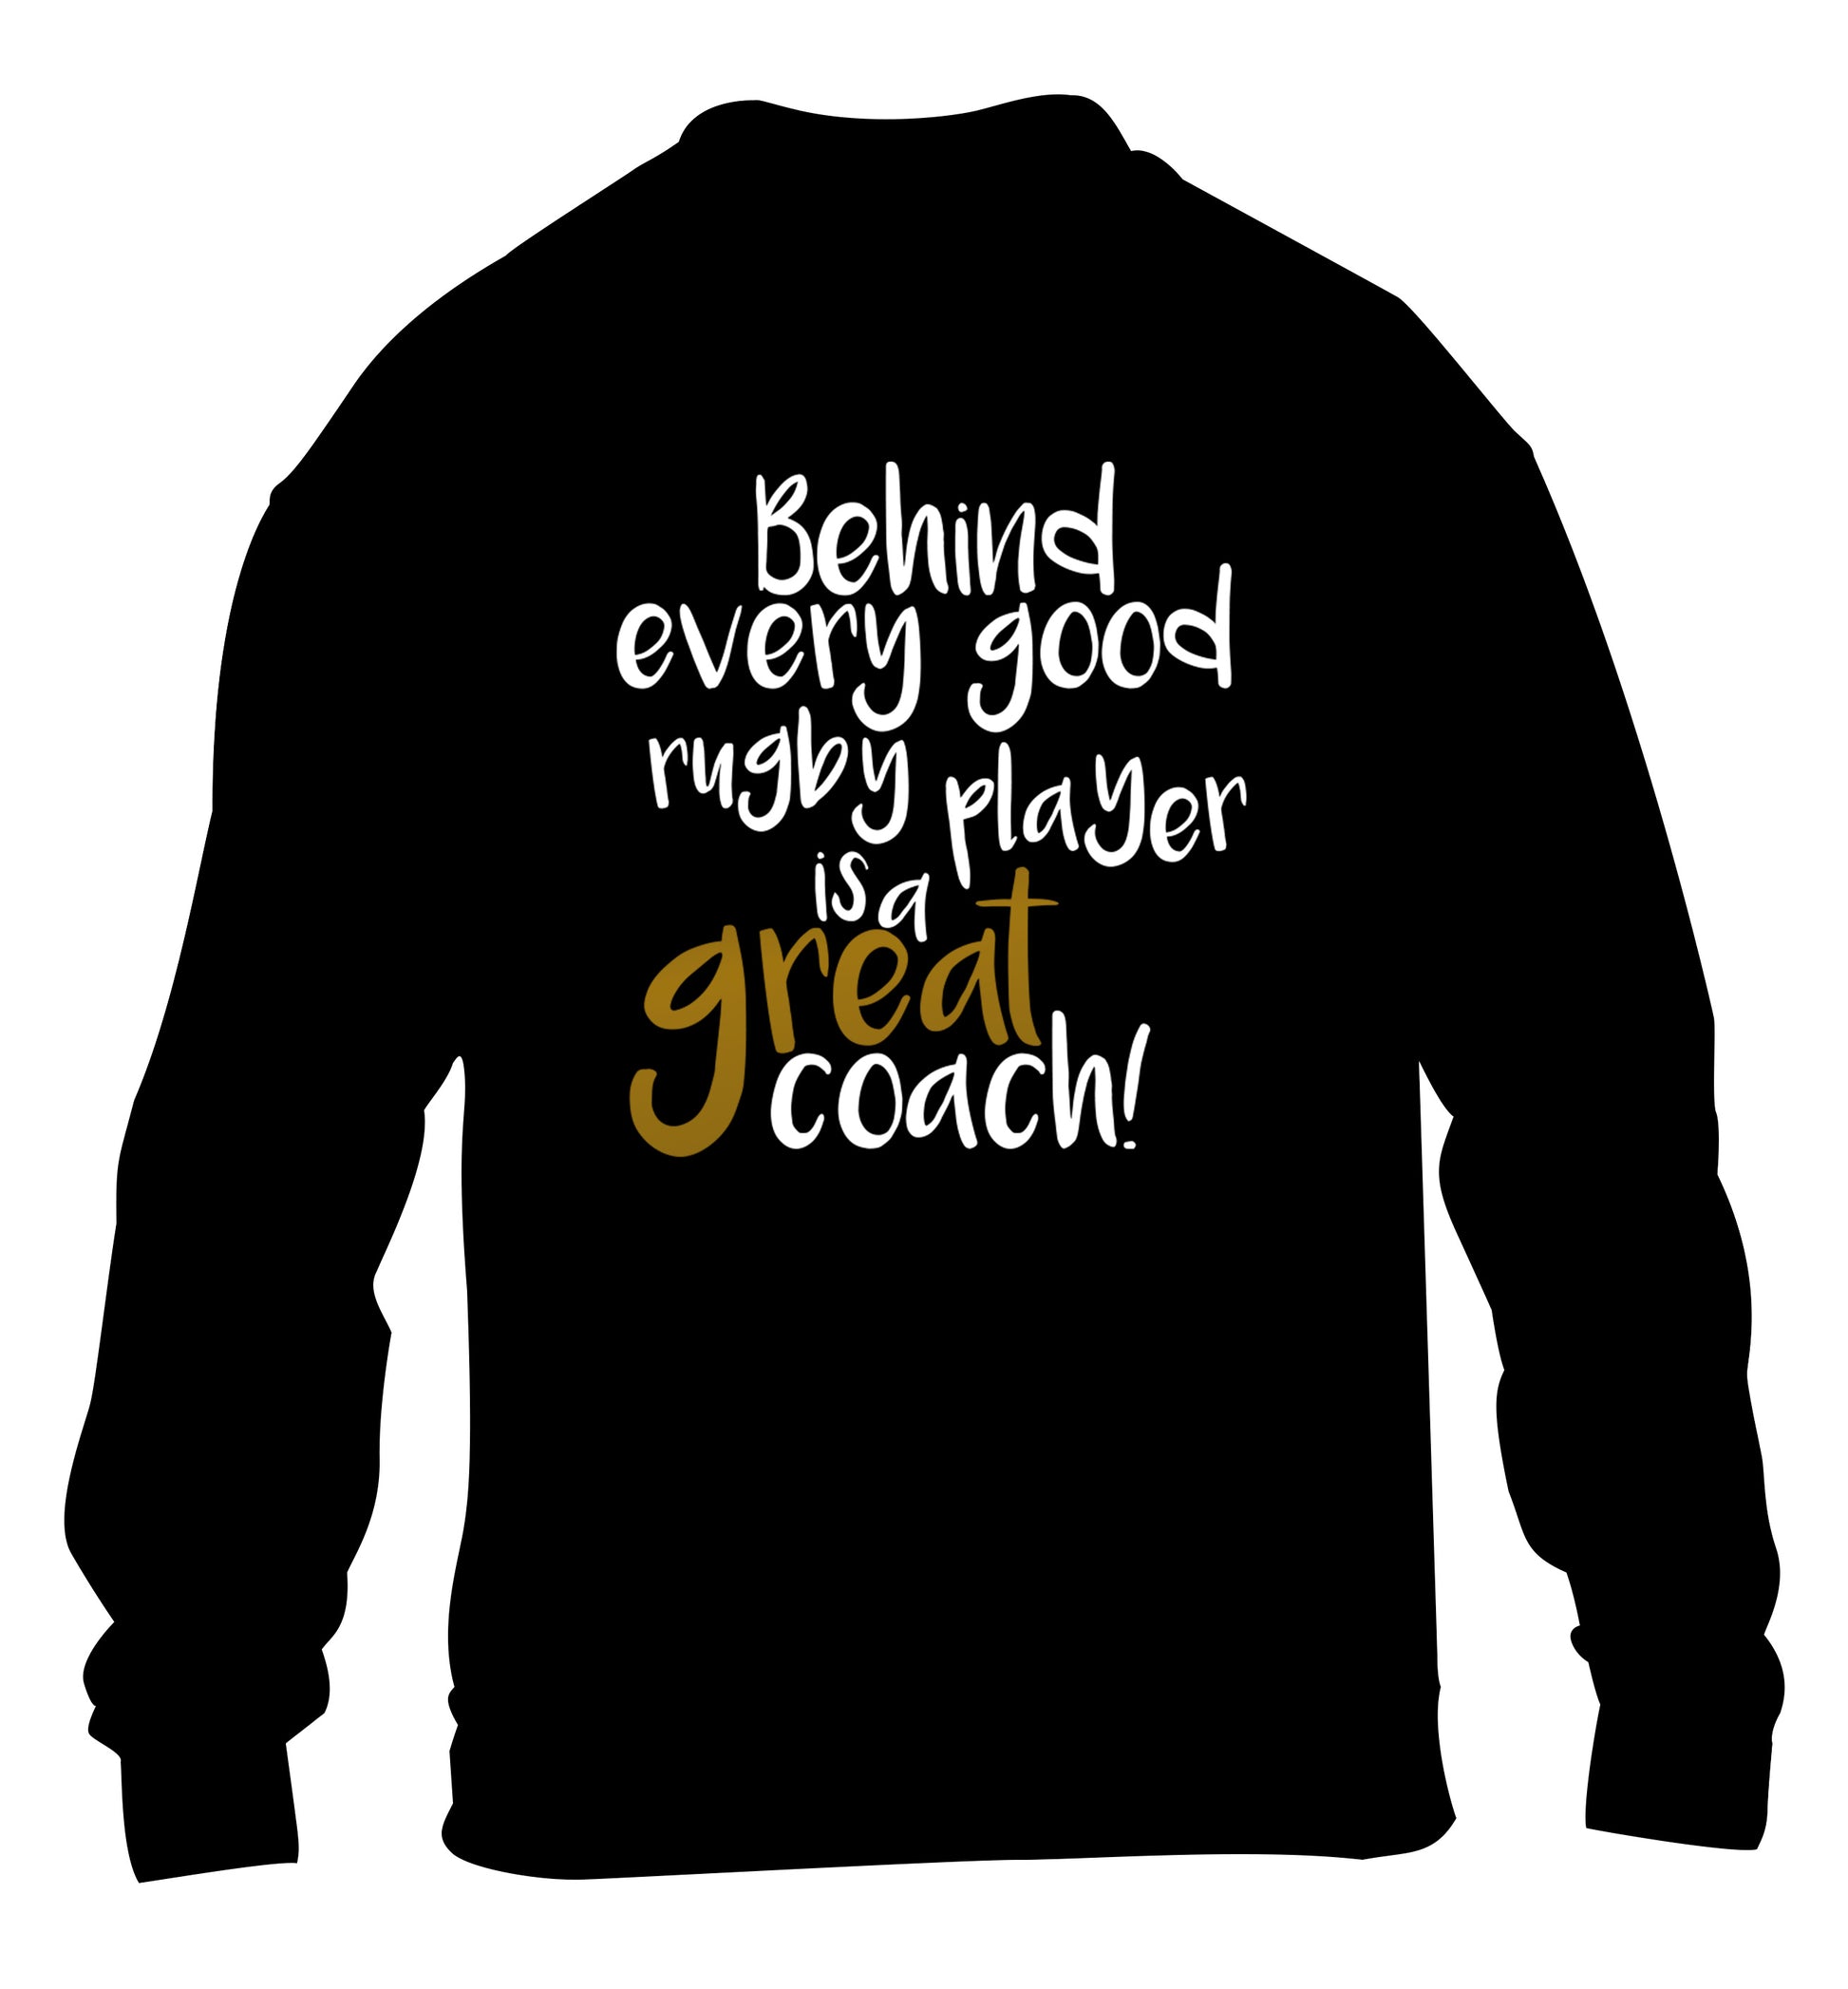 Behind every goor rugby player is a great coach children's black sweater 12-13 Years